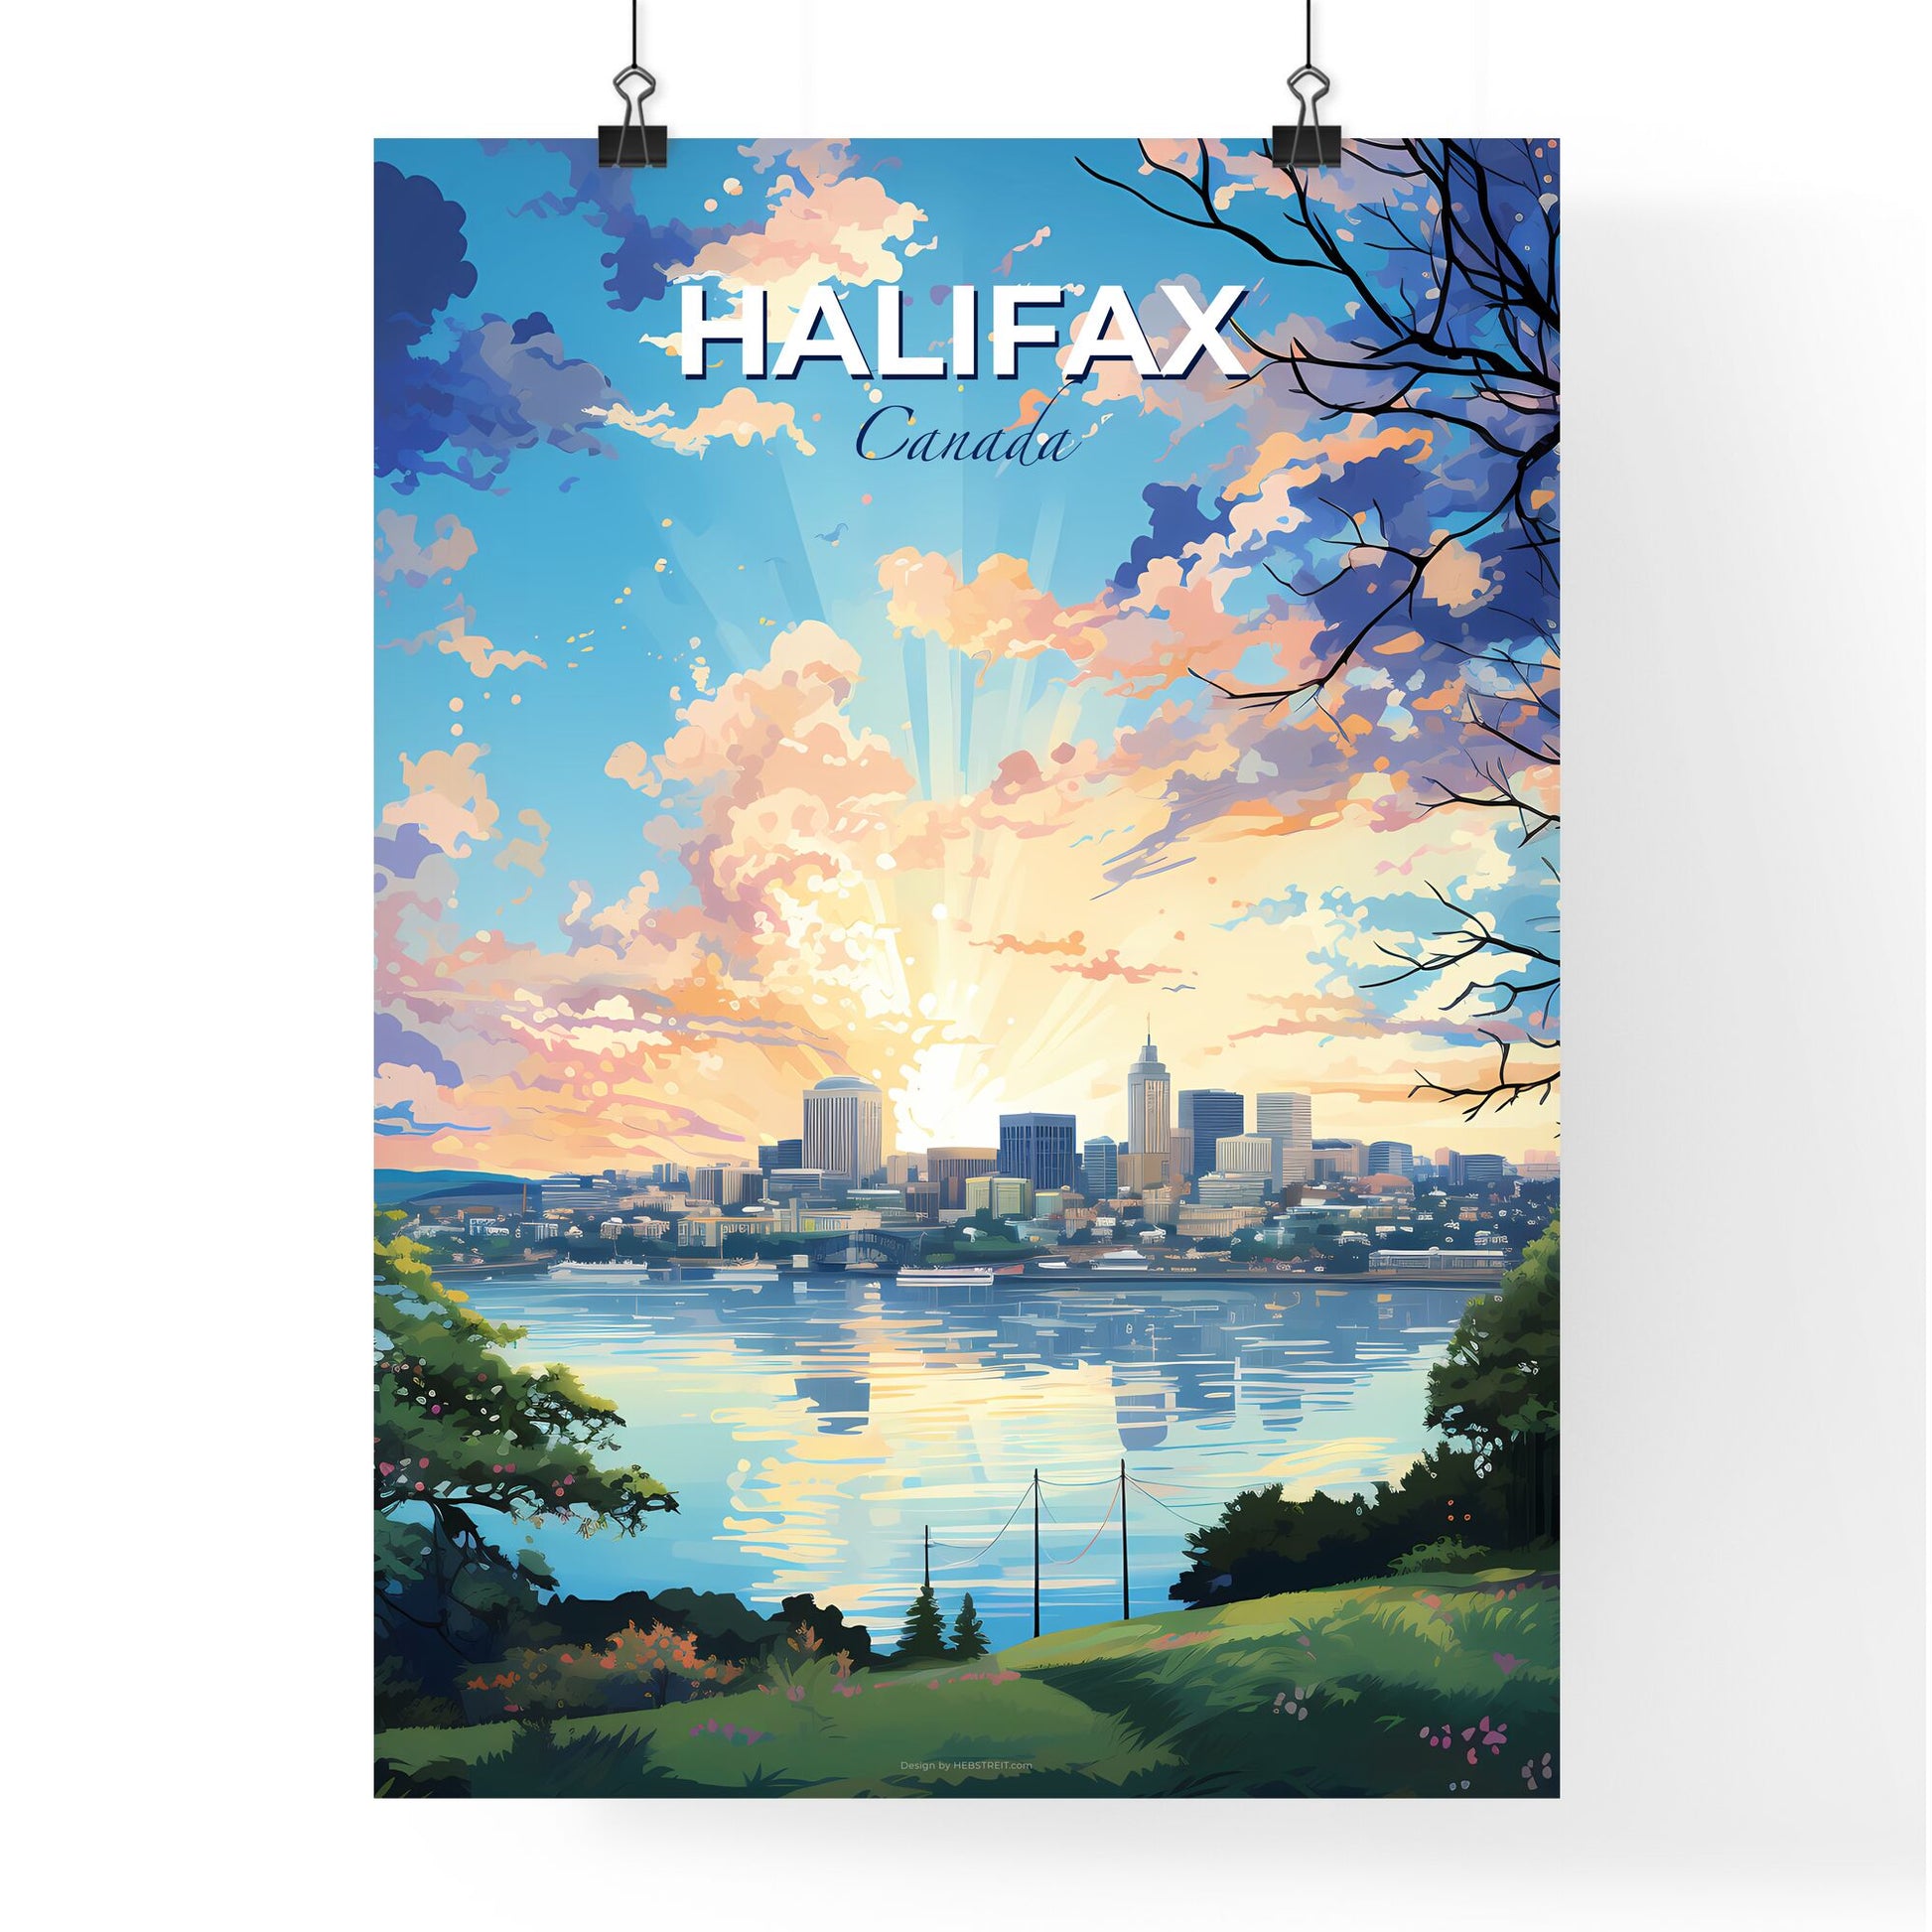 Halifax Canada Skyline - A City By The Water - Customizable Travel Gift Default Title